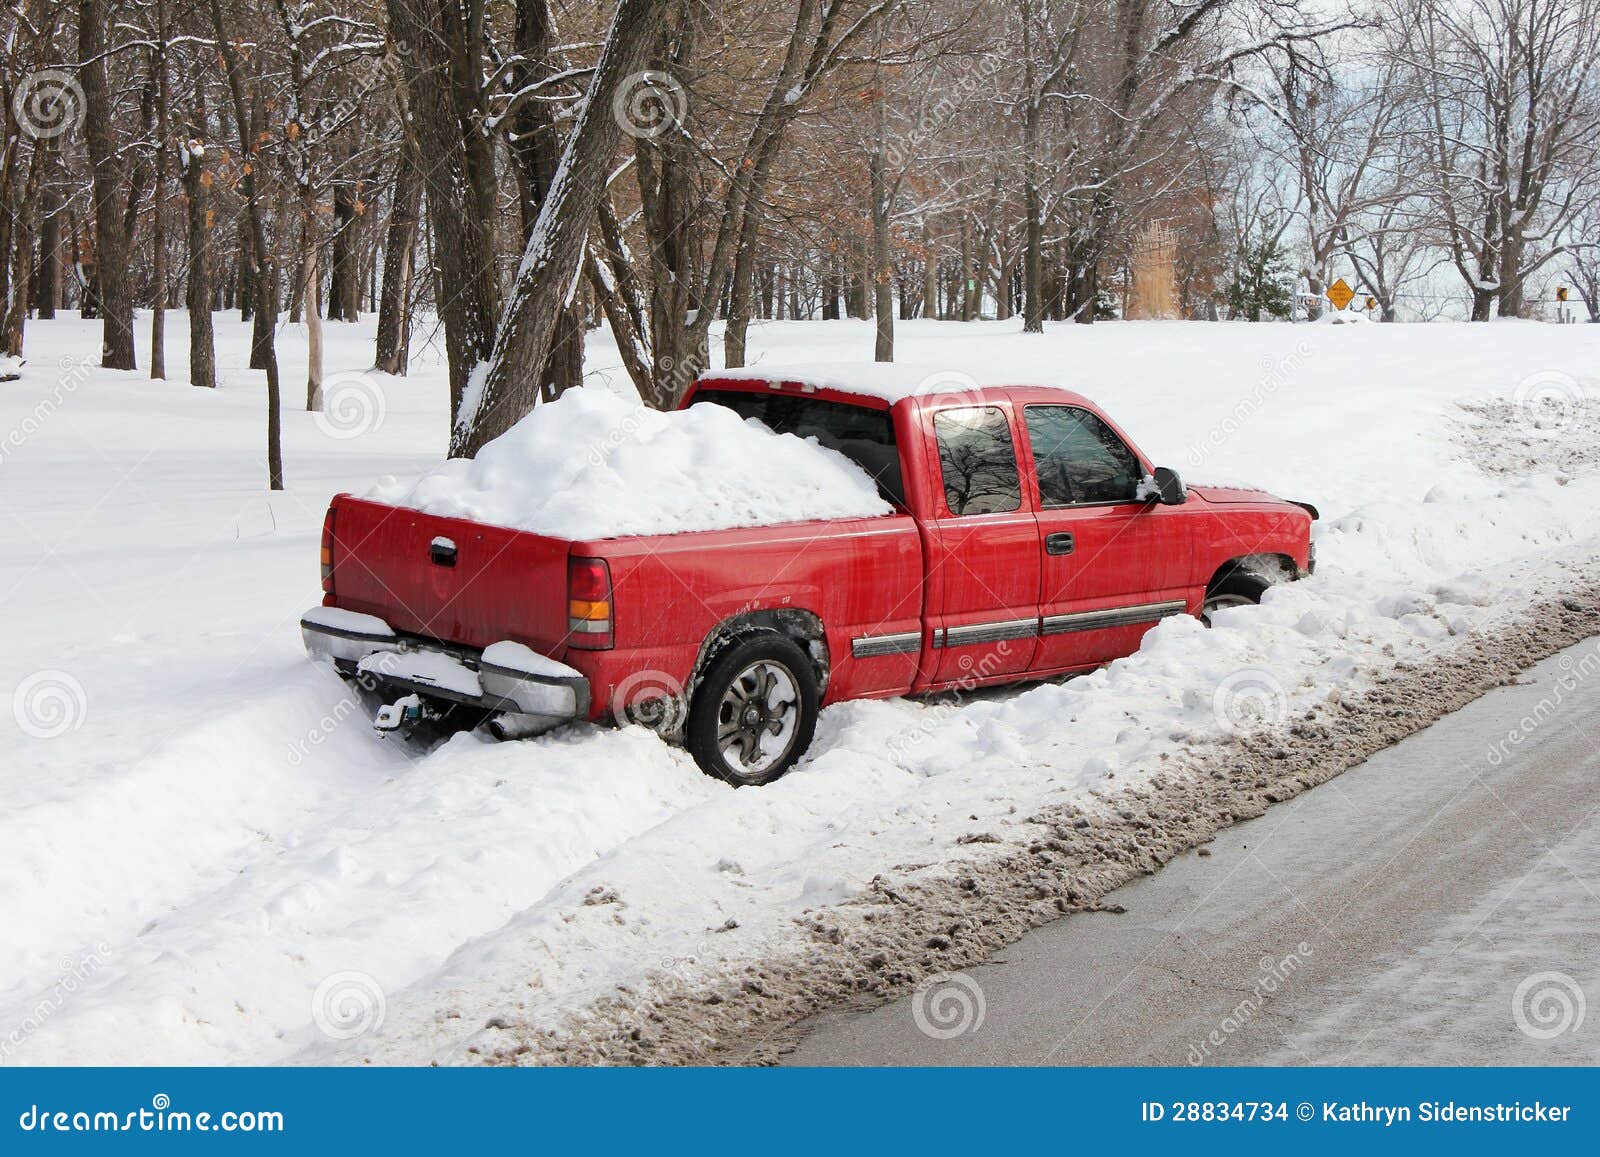 truck stuck in snowbank or ditch